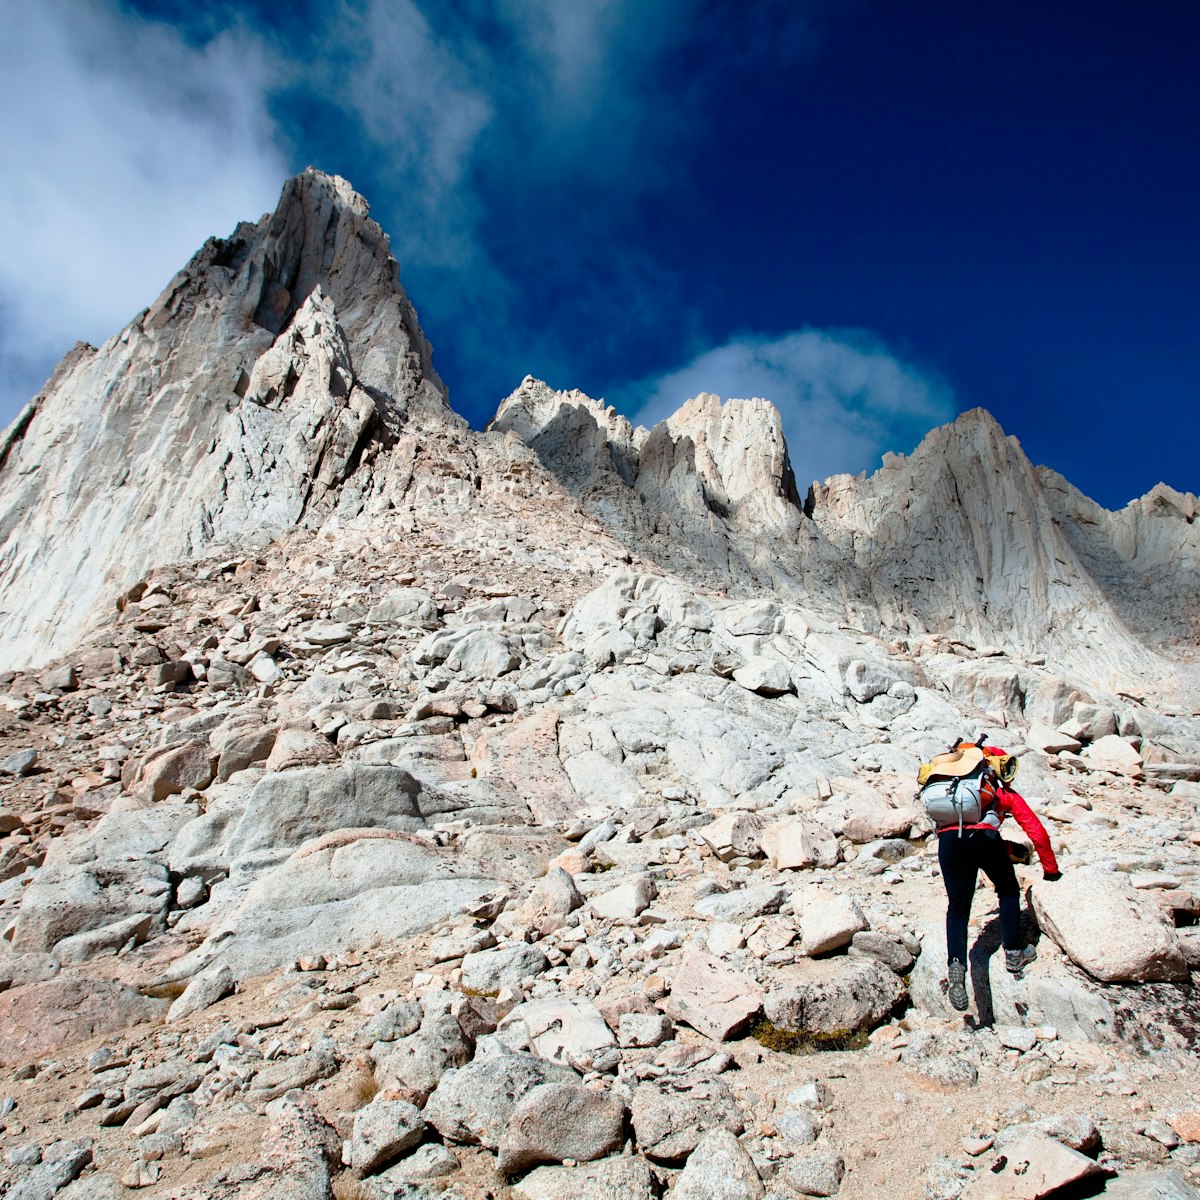 A female hiker scrambles up the mountaineer’s route of Mount Whitney, California on October 3, 2009. Mount Whitney is the highest mountain in the continental United States and stands 14,494 feet tall. Mt Whitney
